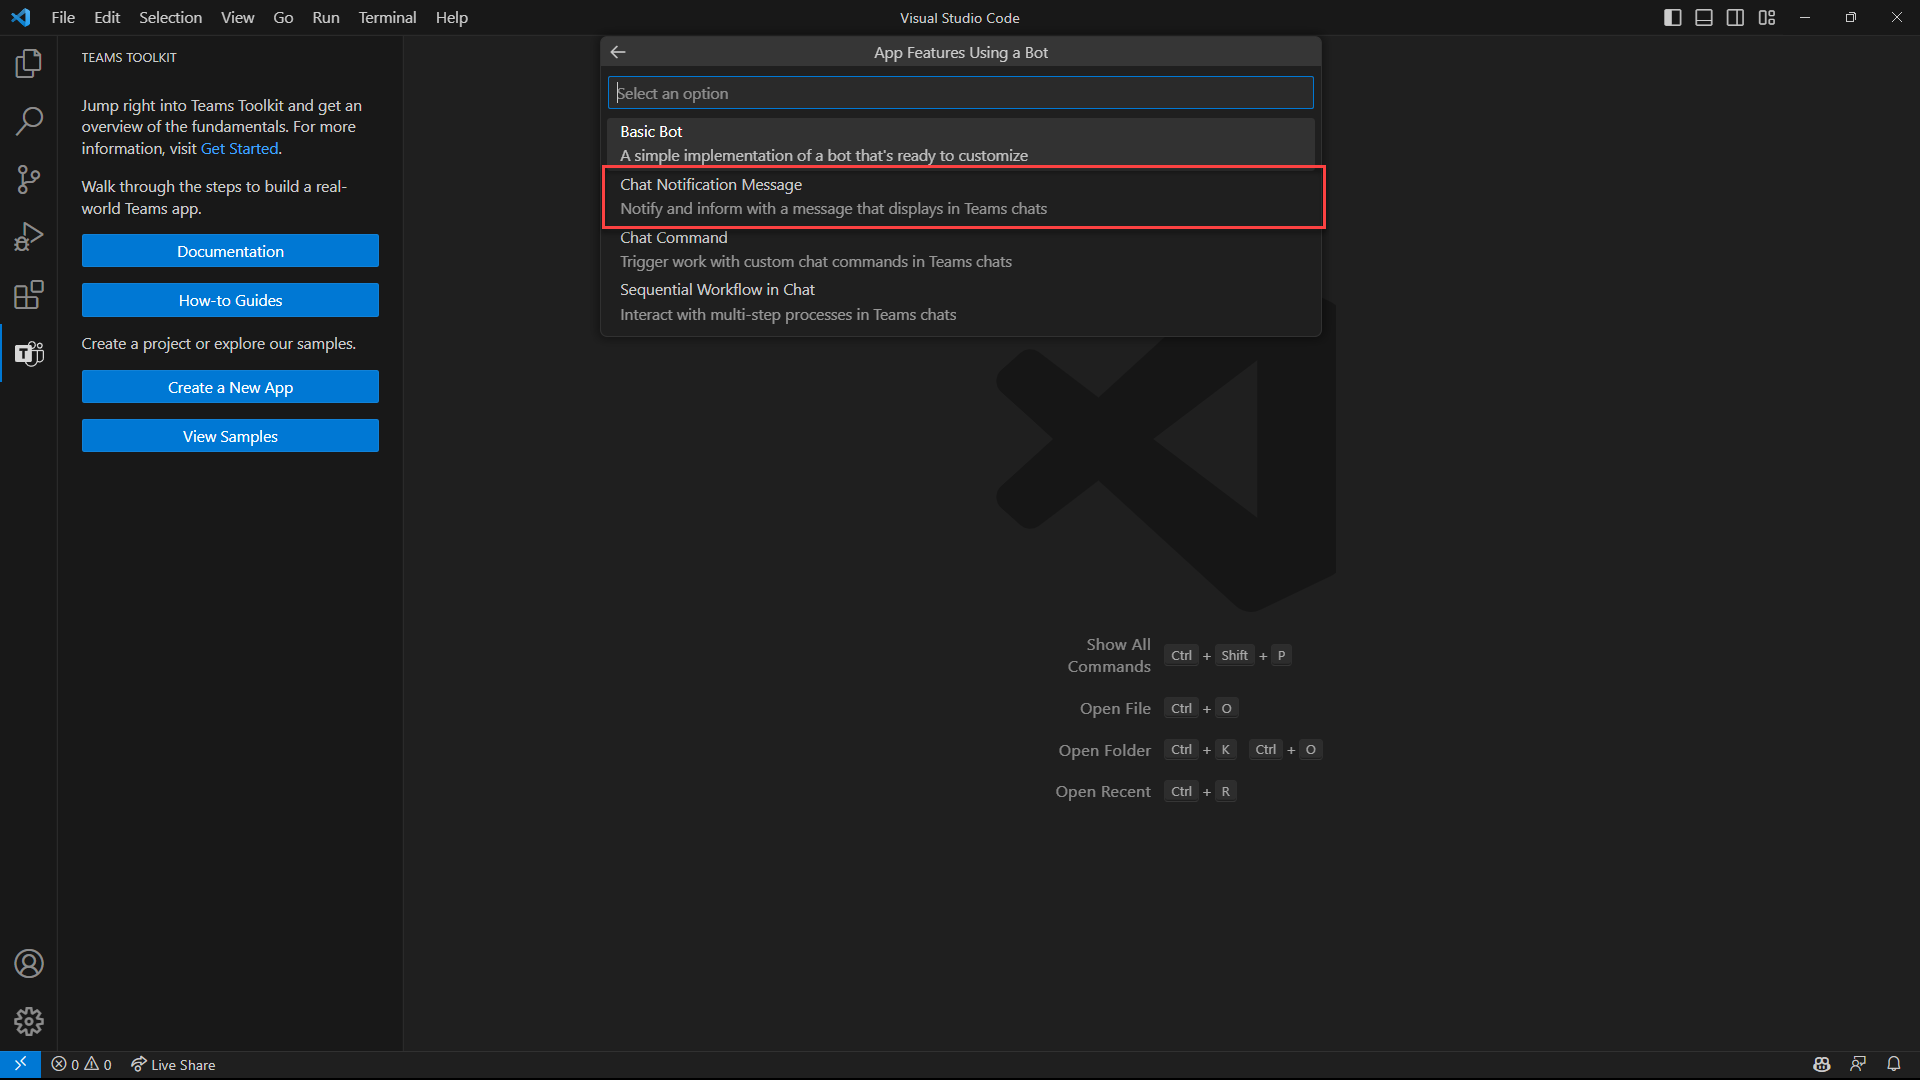 Screenshot of Visual Studio Code that shows the App Features Using a Bot menu for Teams Toolkit and the Chat Notification Message feature.